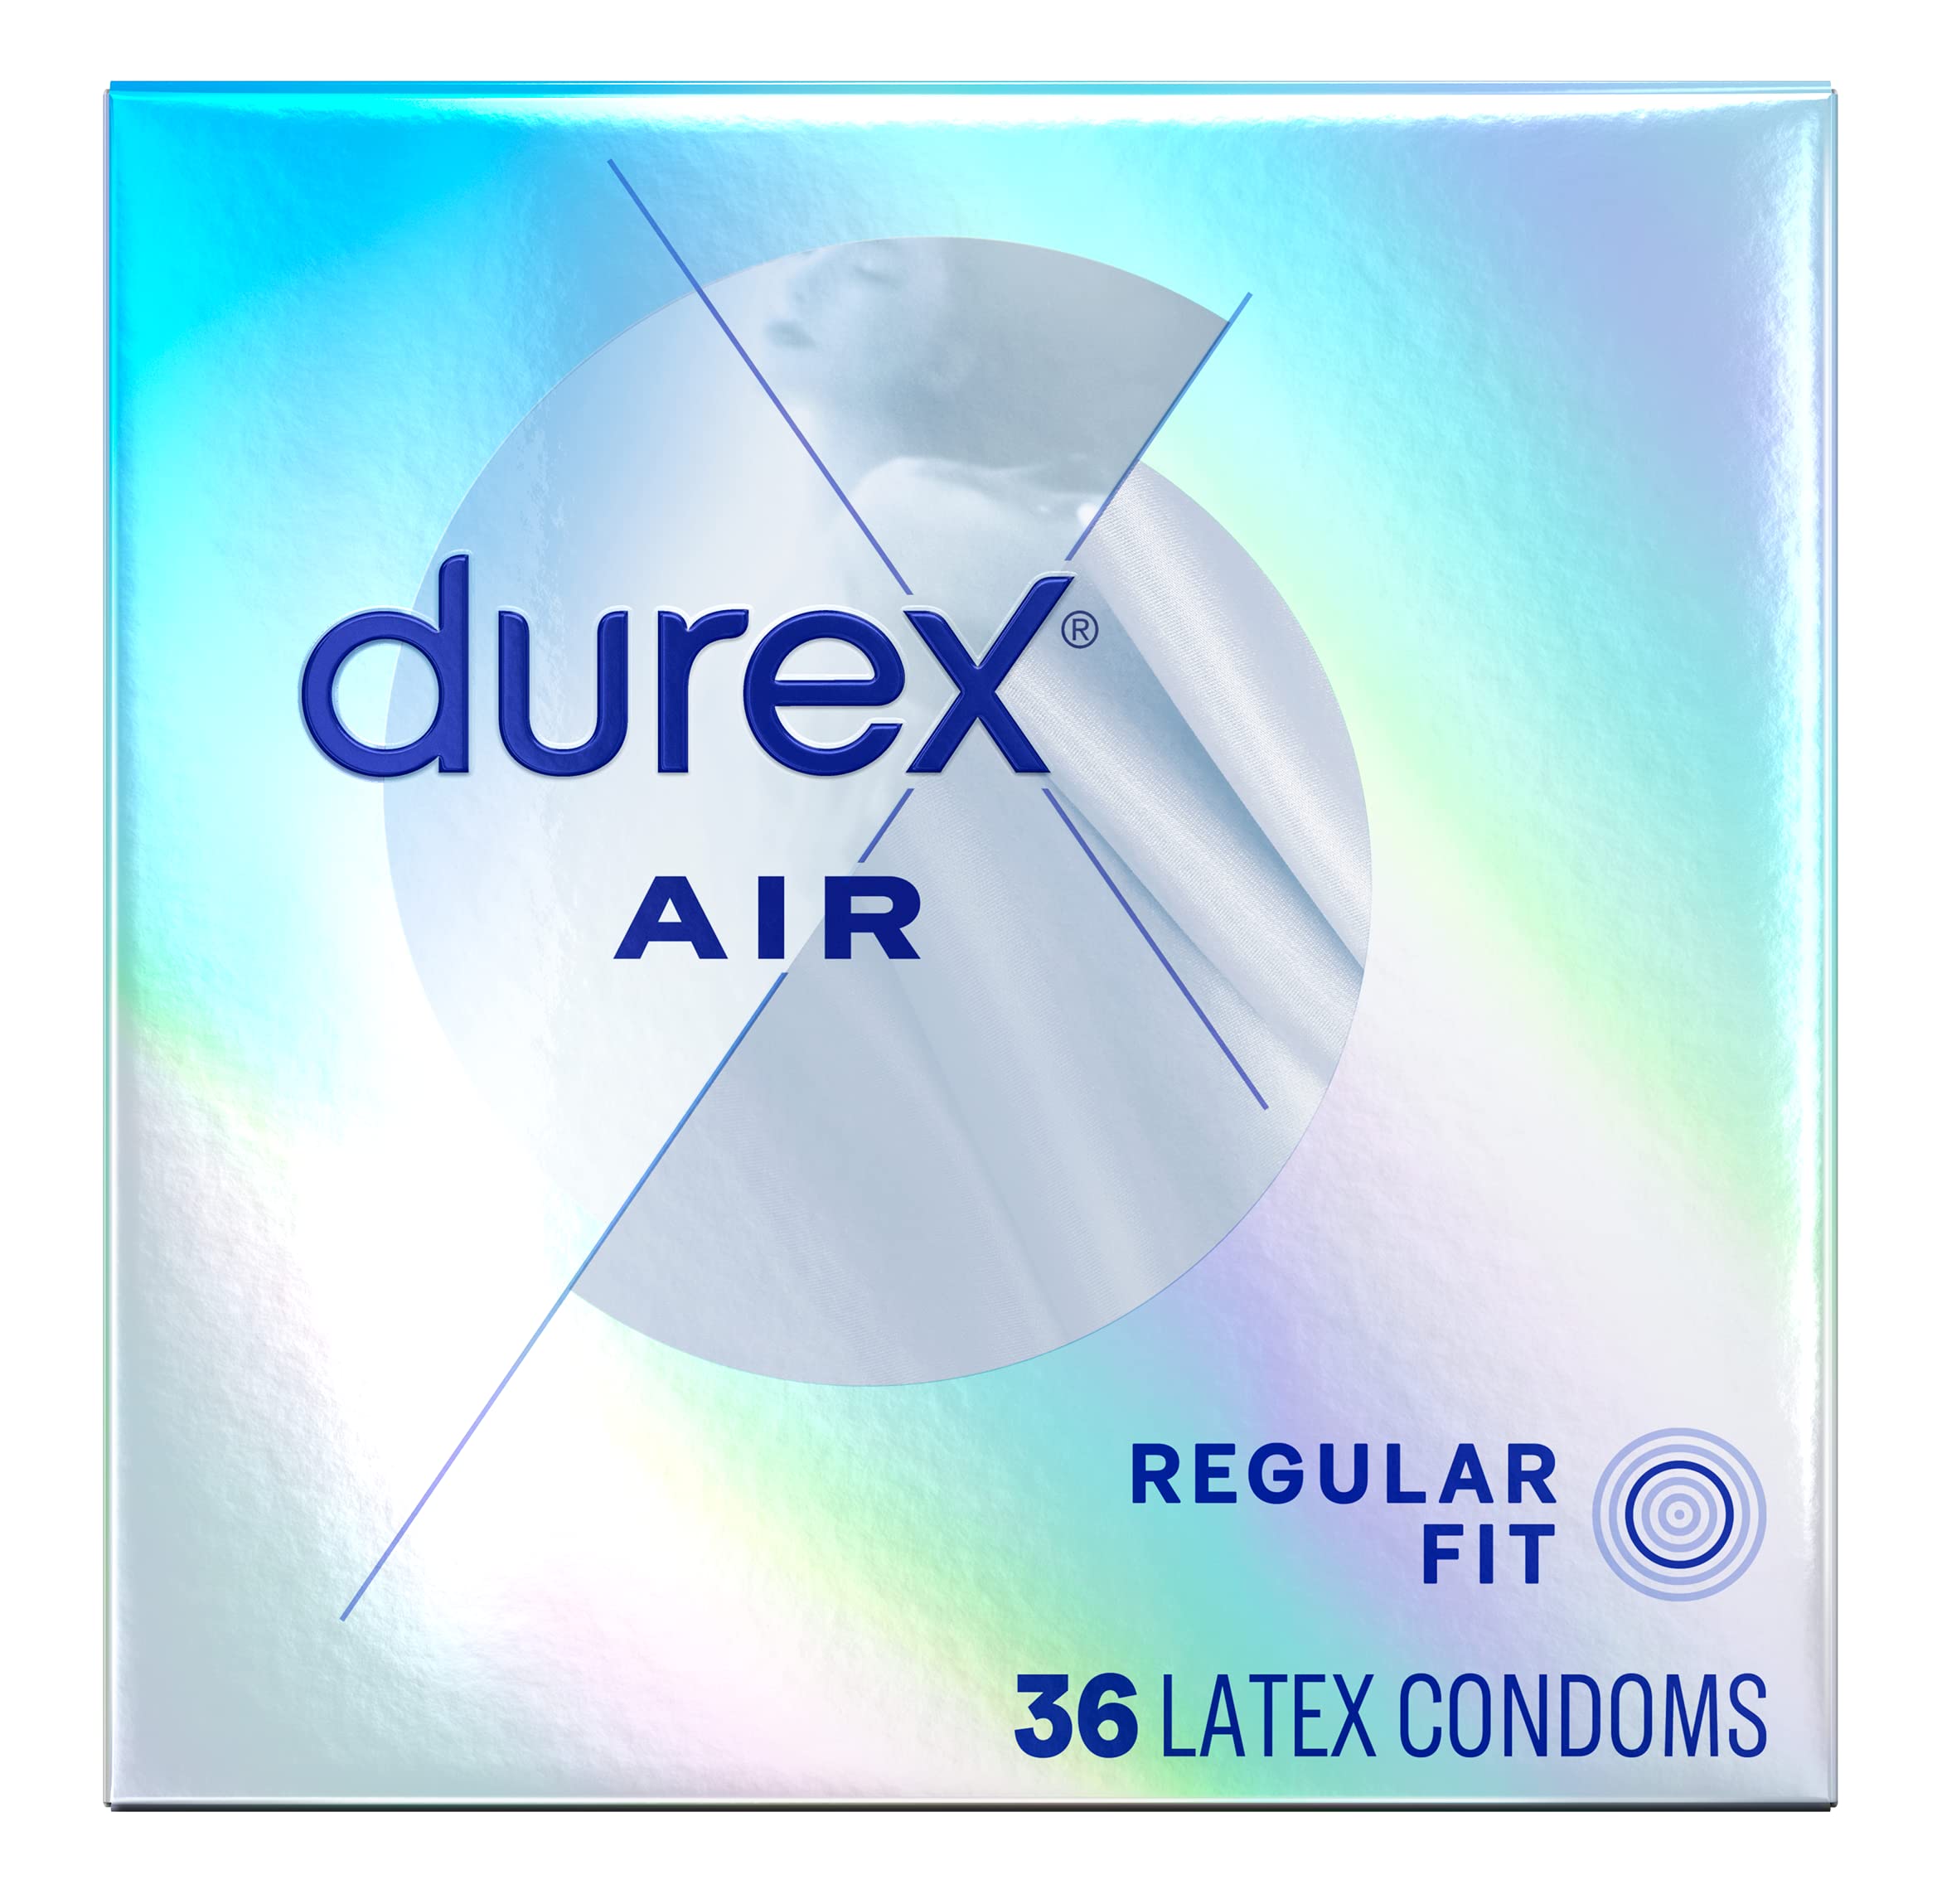 Durex Air Natural Rubber Latex Condoms 36 Count $15.36 & More w/ S&S + Free S/H with Prime on Amazon